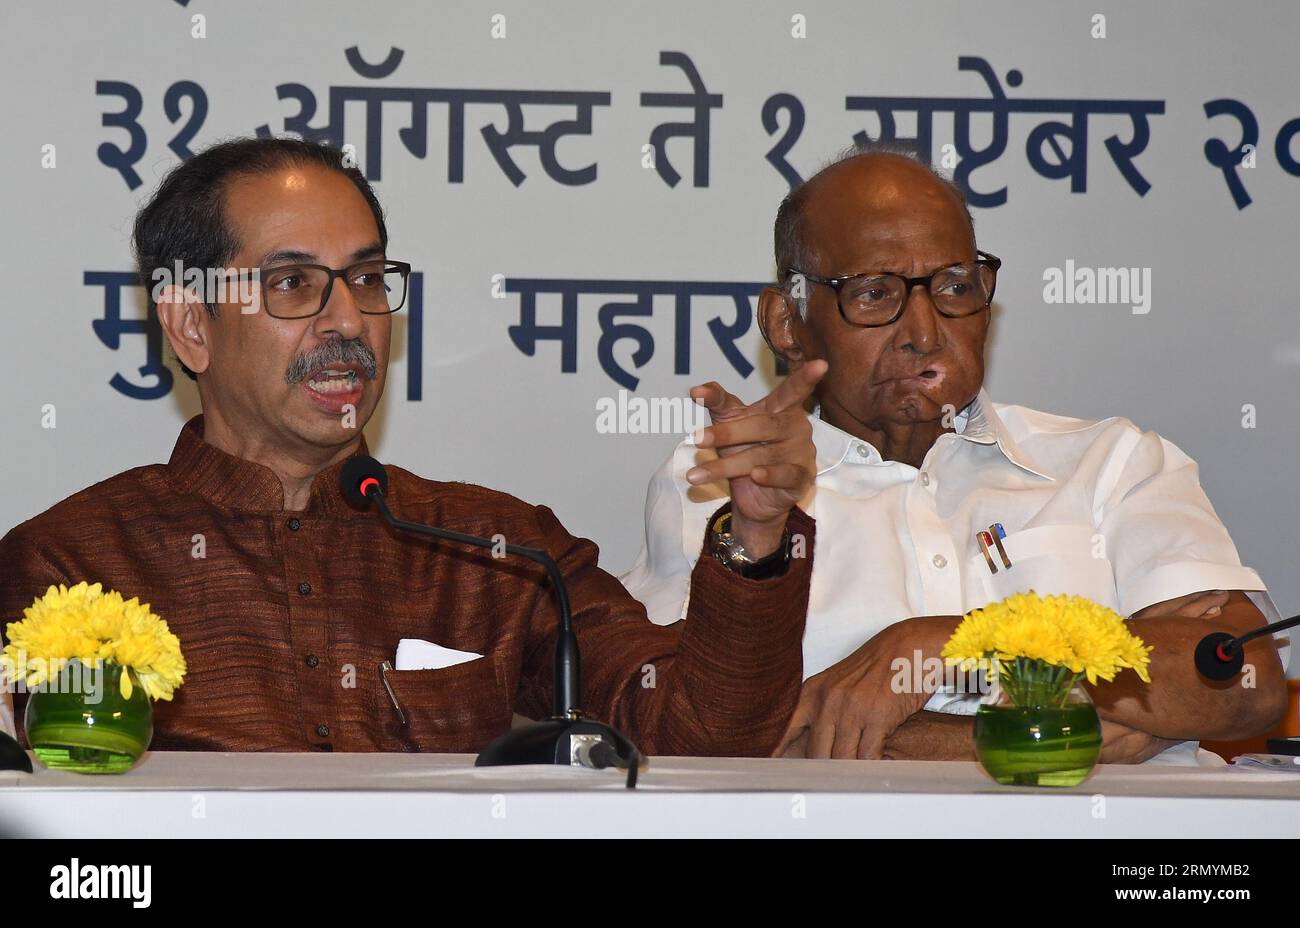 Mumbai, India. 30th Aug, 2023. L-R Shiv Sena (UBT) chief Uddhav Thackeray gestures with his hand as Nationalist Congress Party (NCP) chief Sharad Govindrao Pawar looks on during the Maha Vikas Aghadi (MVA) press conference in Mumbai. The press conference was held ahead of Indian National Developmental Inclusive Alliance (INDIA) third meeting to be held on 31st August and 1st September 2023. Credit: SOPA Images Limited/Alamy Live News Stock Photo